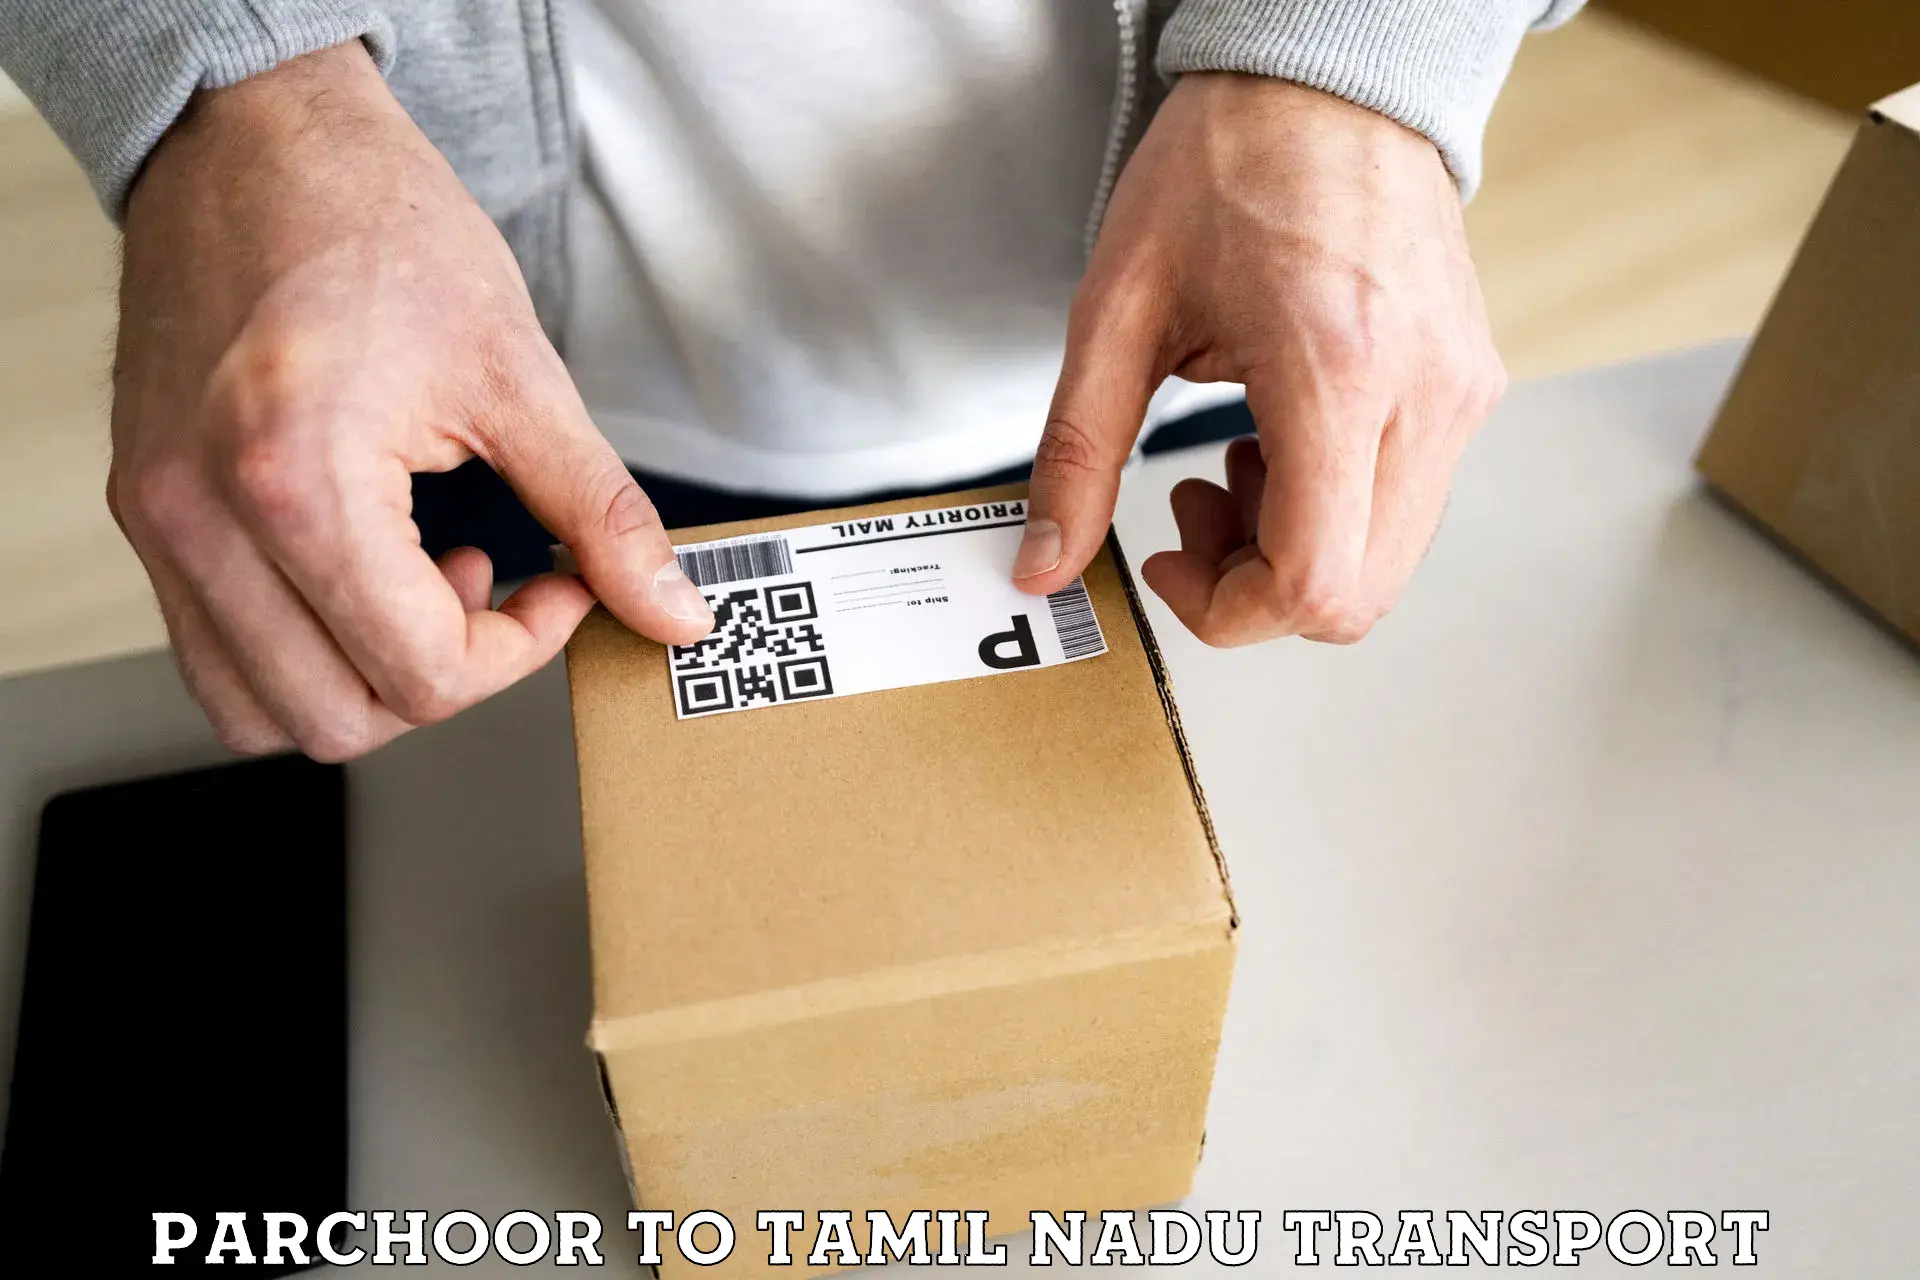 Air freight transport services Parchoor to Sivakasi